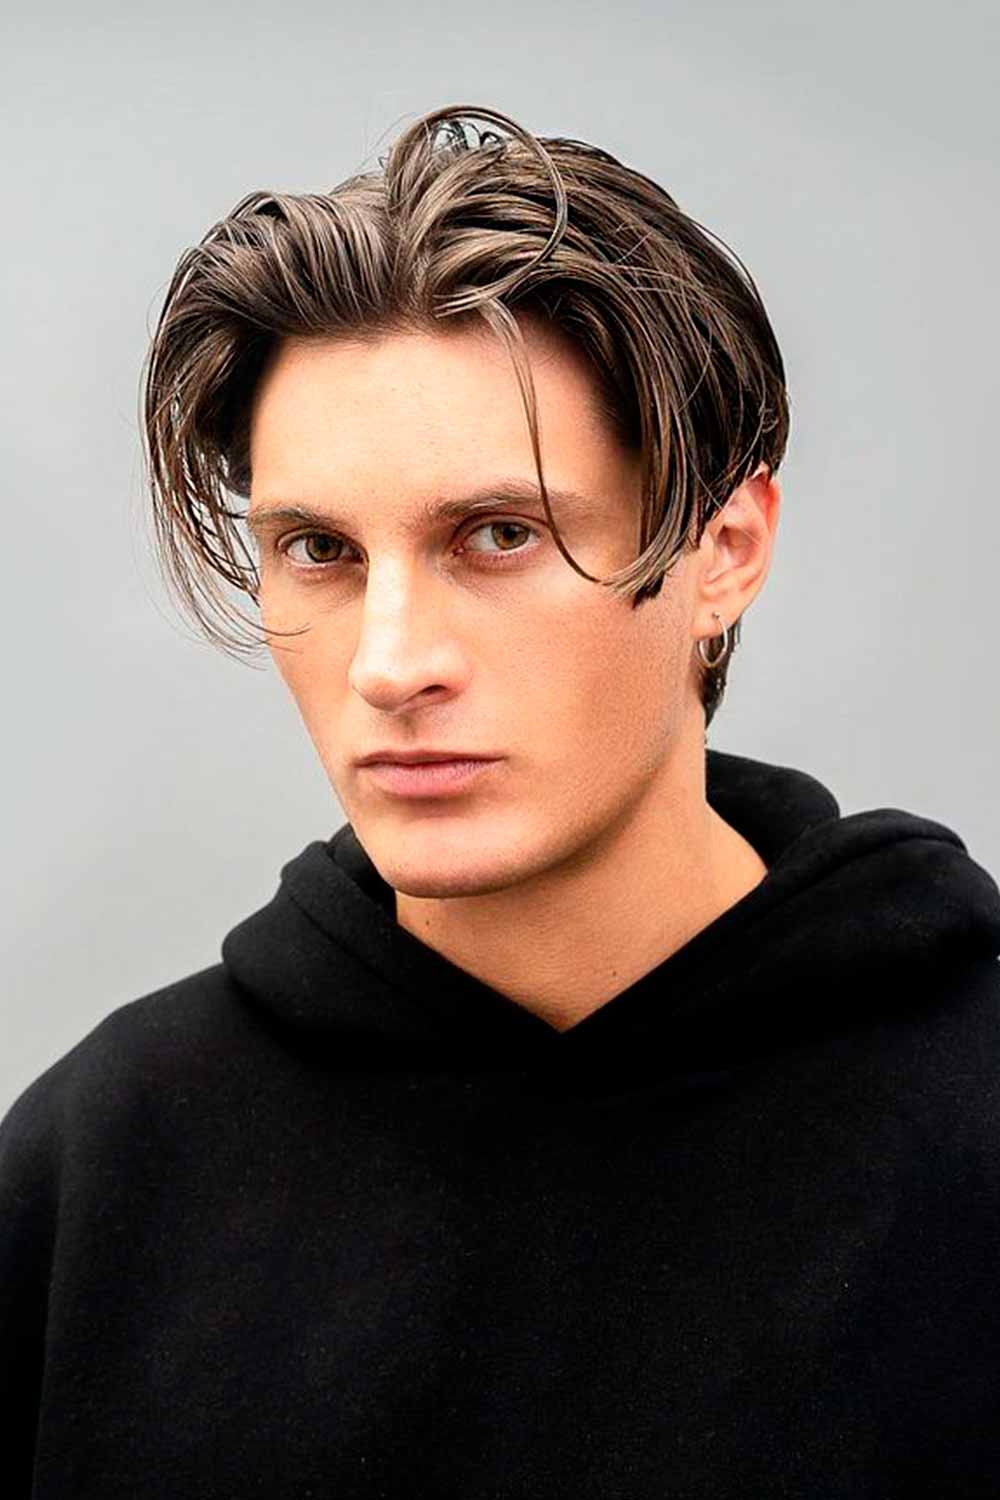 Middle Part Hair Men #typesofhaircuts #typesofhaircutsformen #typesofmenshaircuts #haircutnames